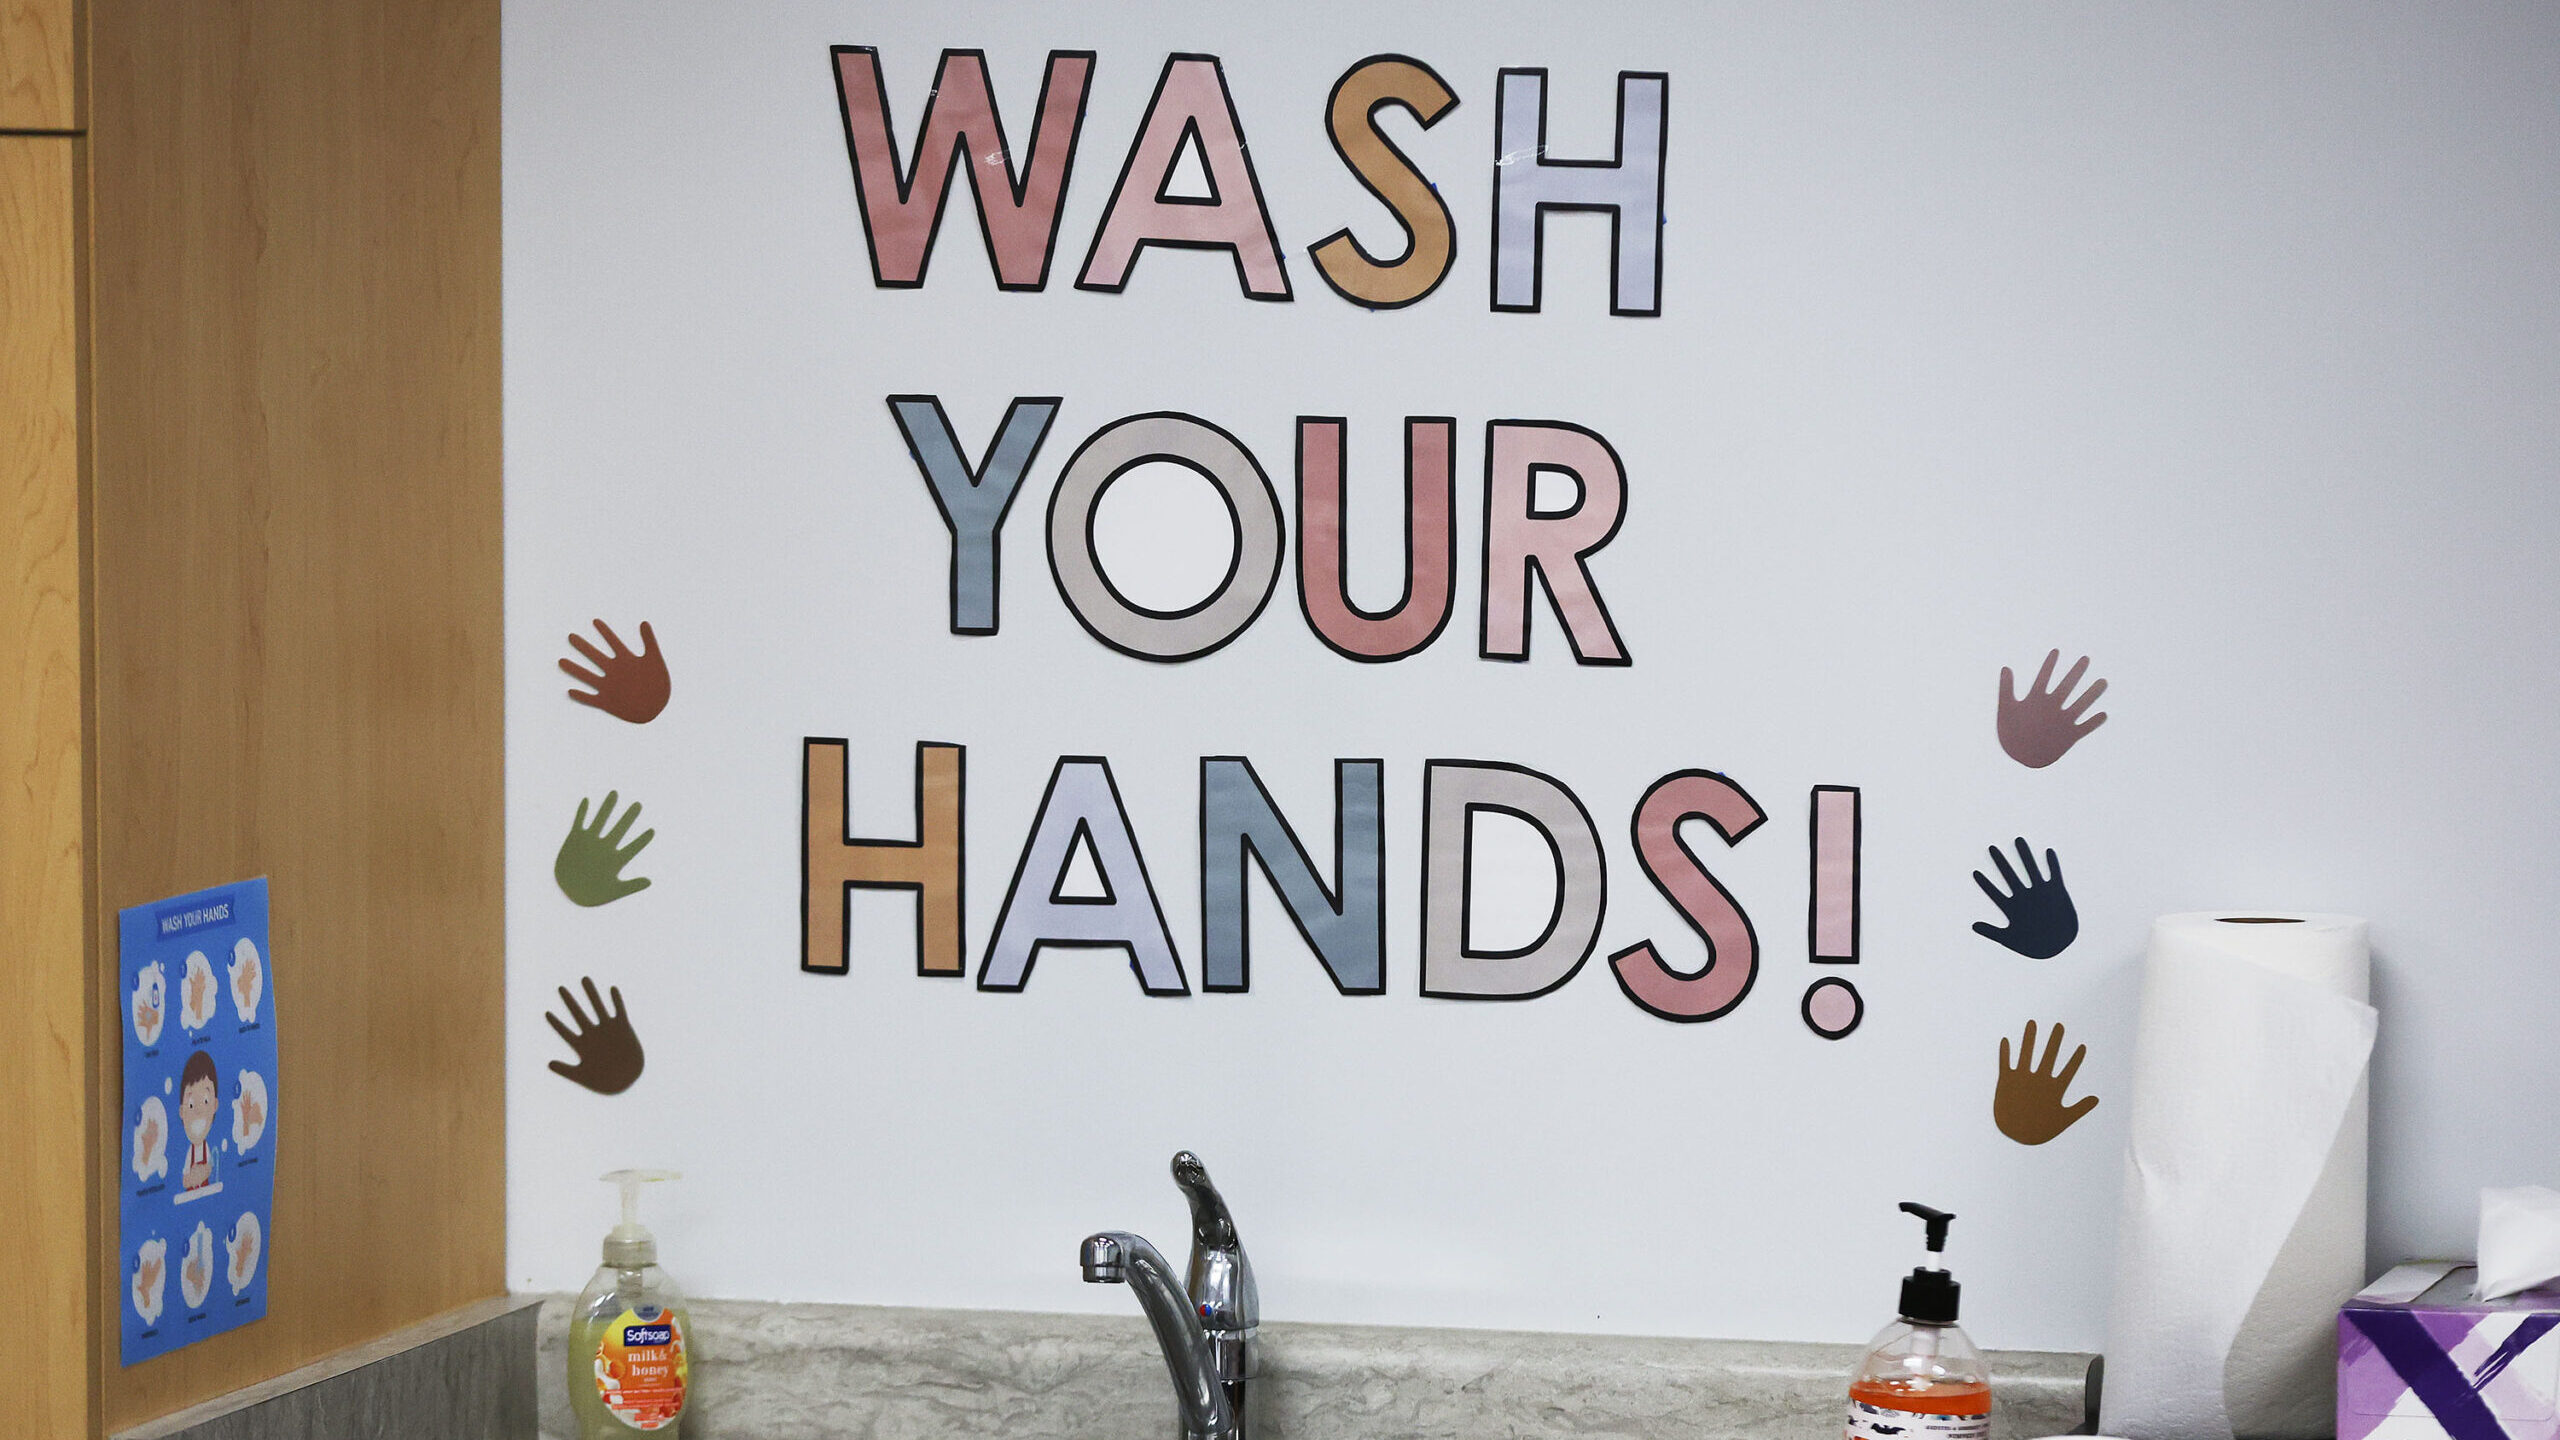 wash your hands sign shown, utah health officials recommend handwashing to prevent norovirus...